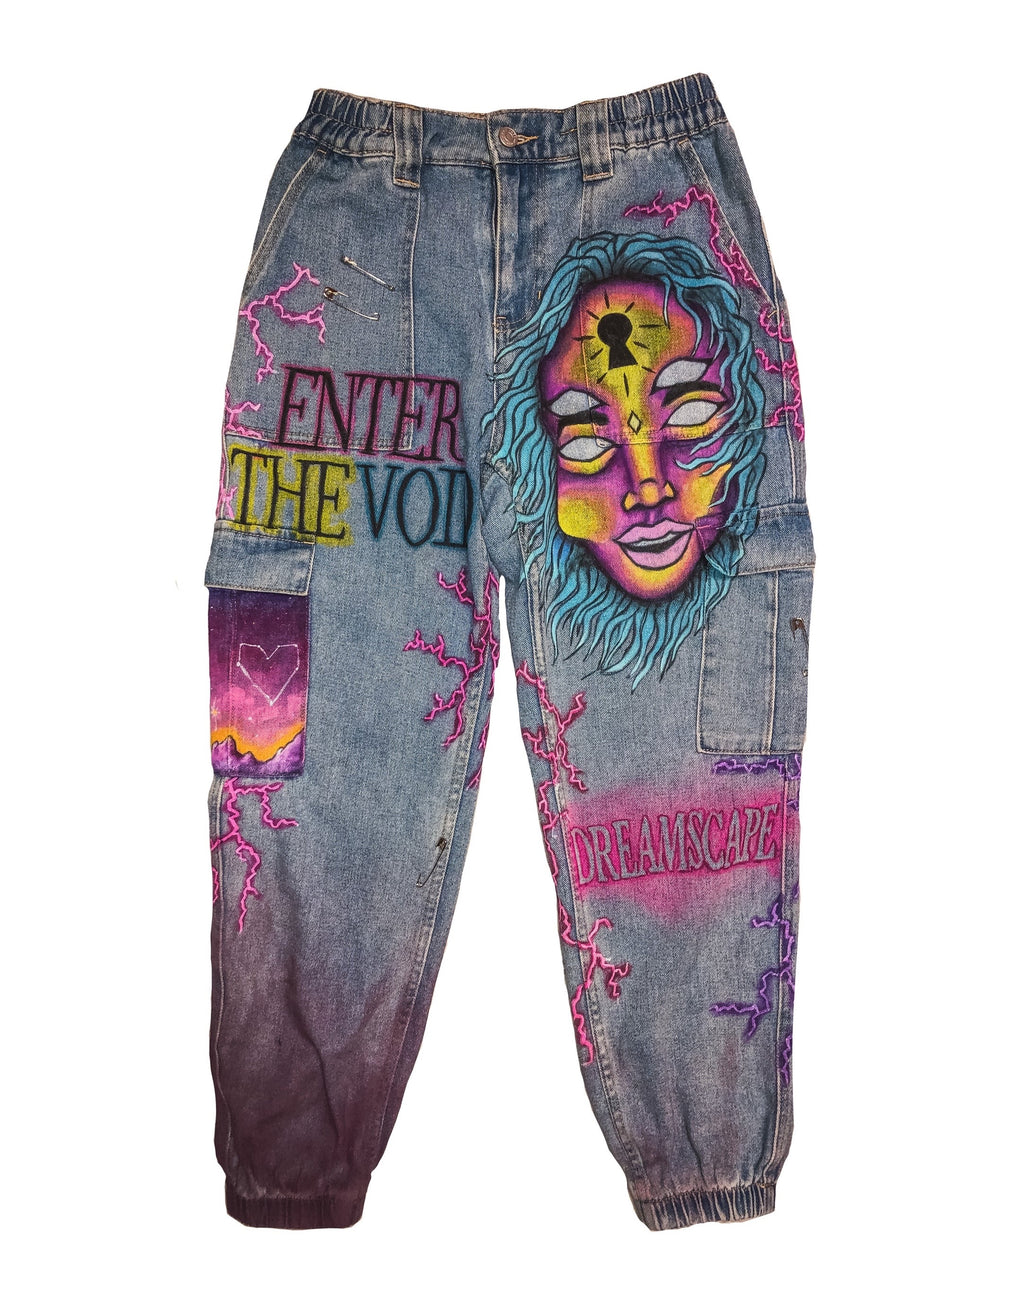 ENTER THE VOID jeans